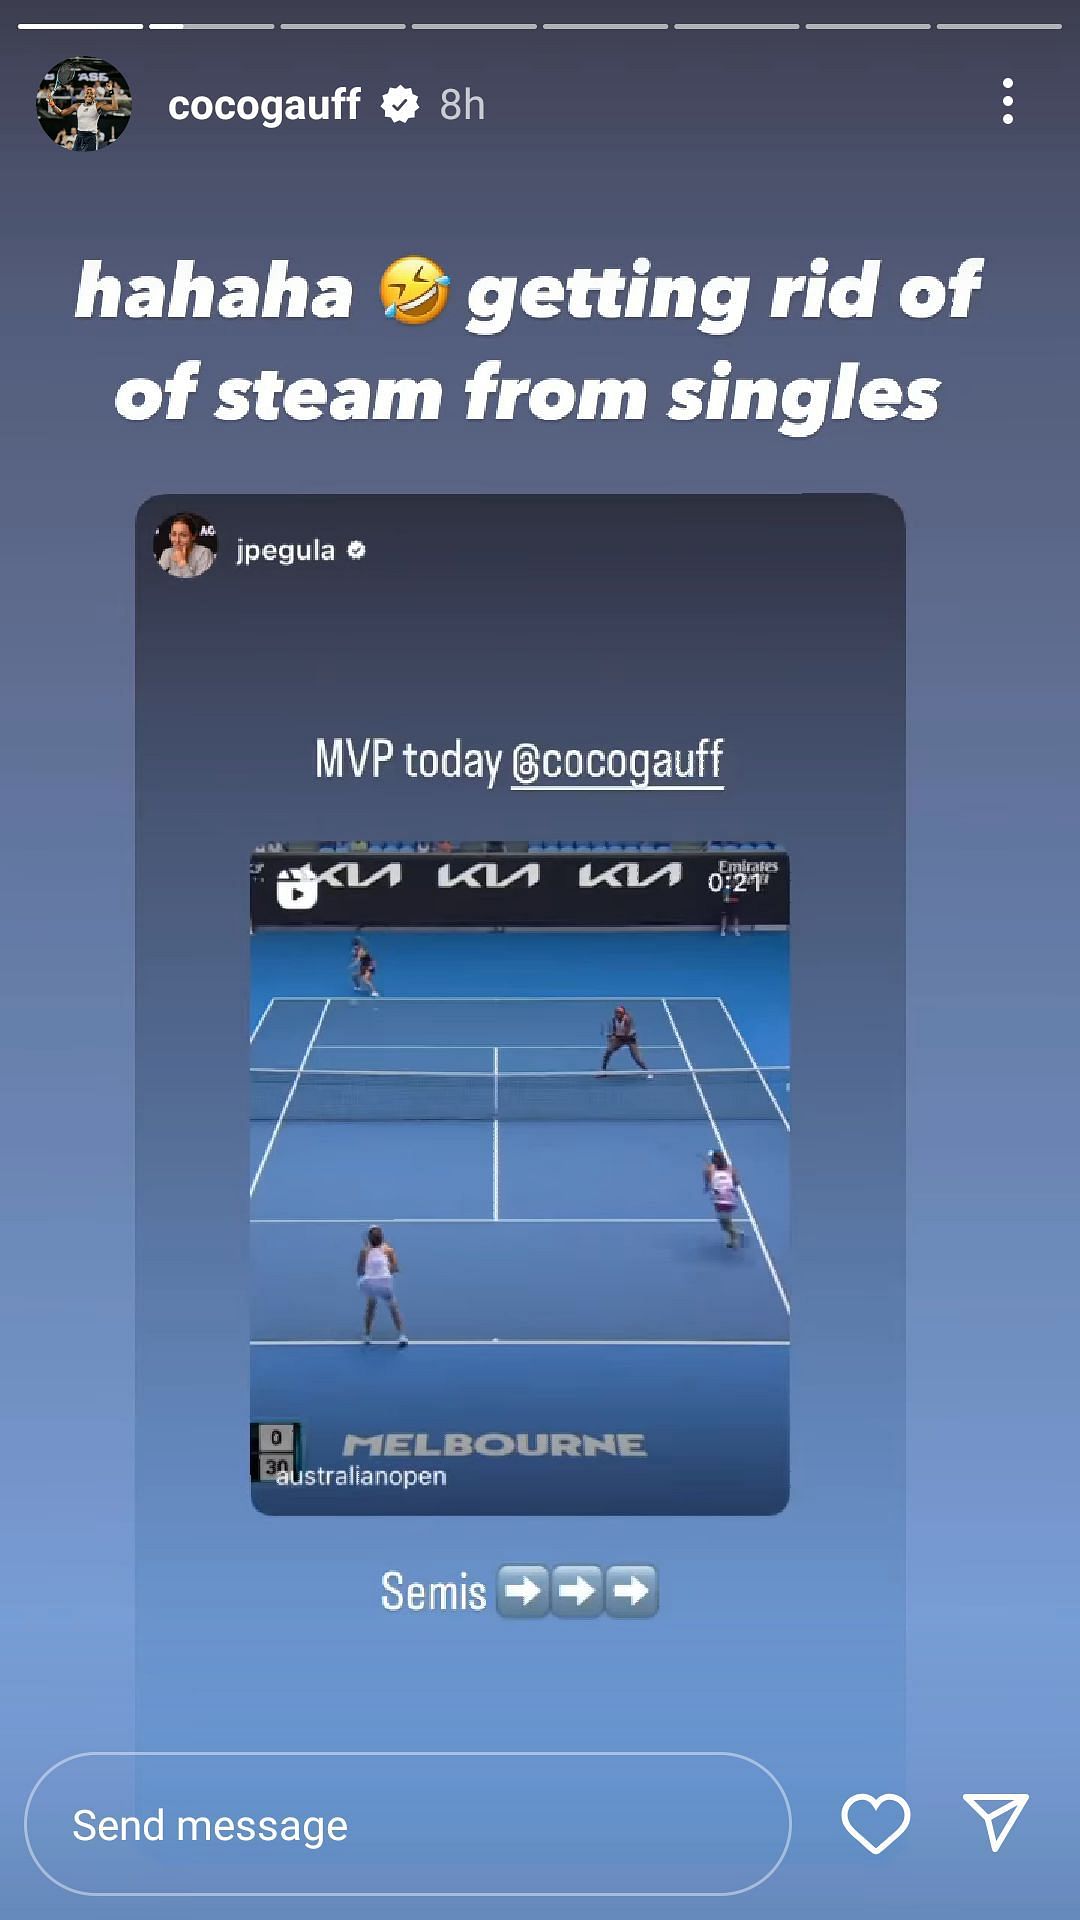 The tennis players on Instagram